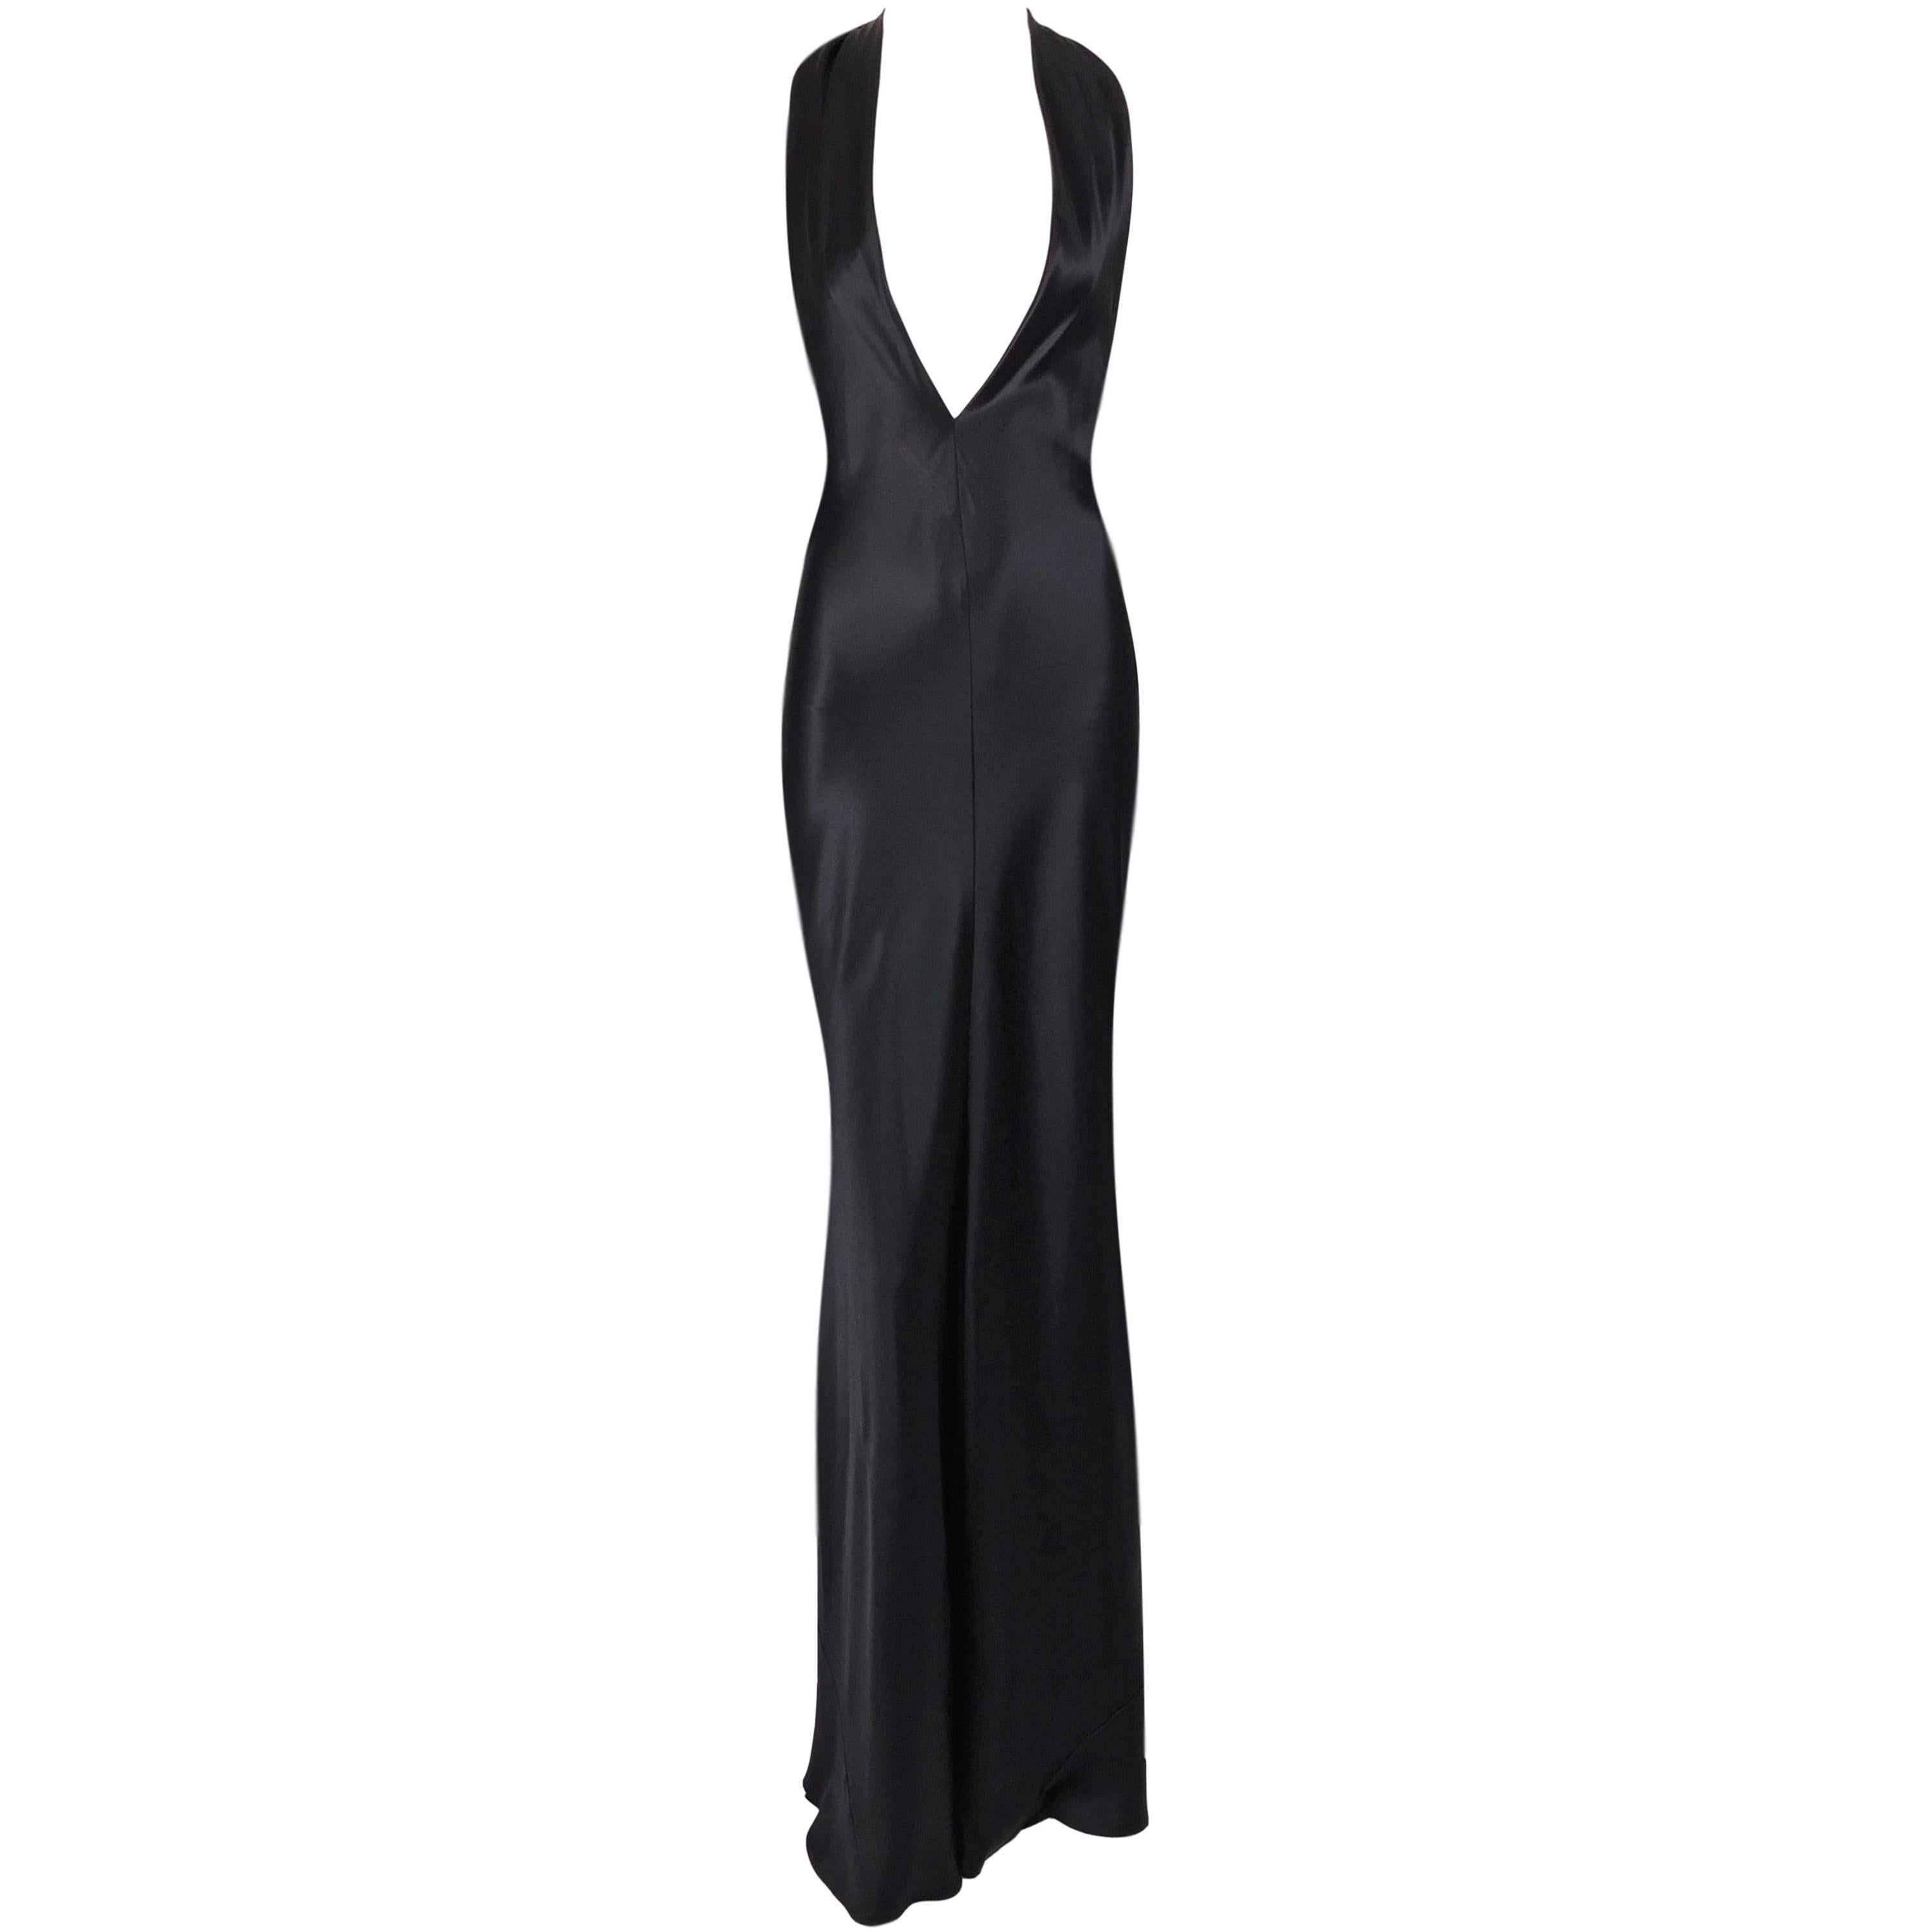 NWT F/W 2002 Dolce and Gabbana Black Satin Old Hollywood Plunging Gown ...